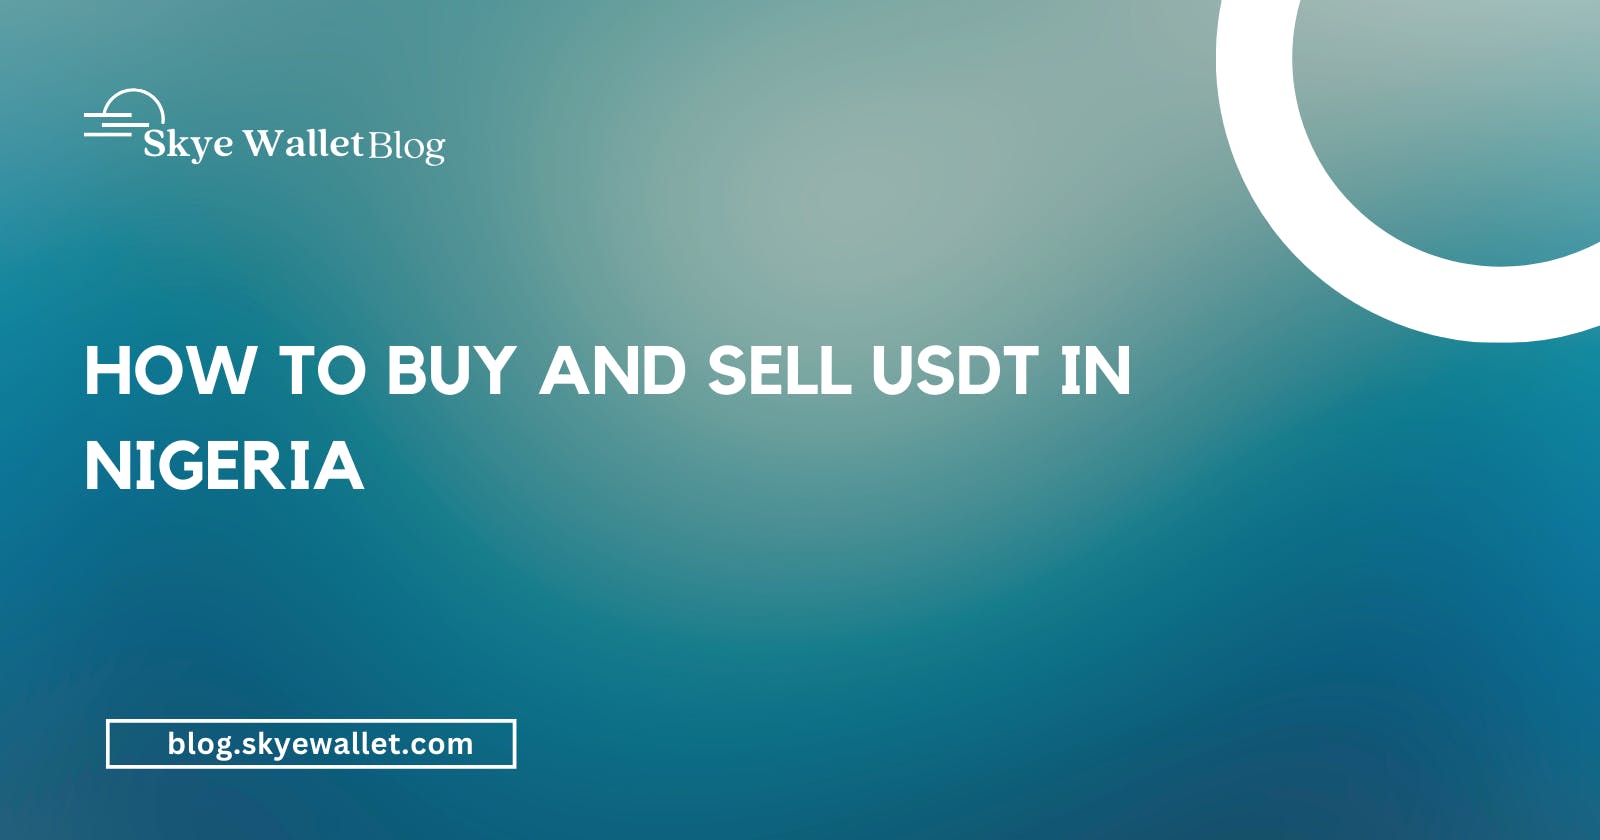 How To Buy and Sell USDT (tether) in Nigeria